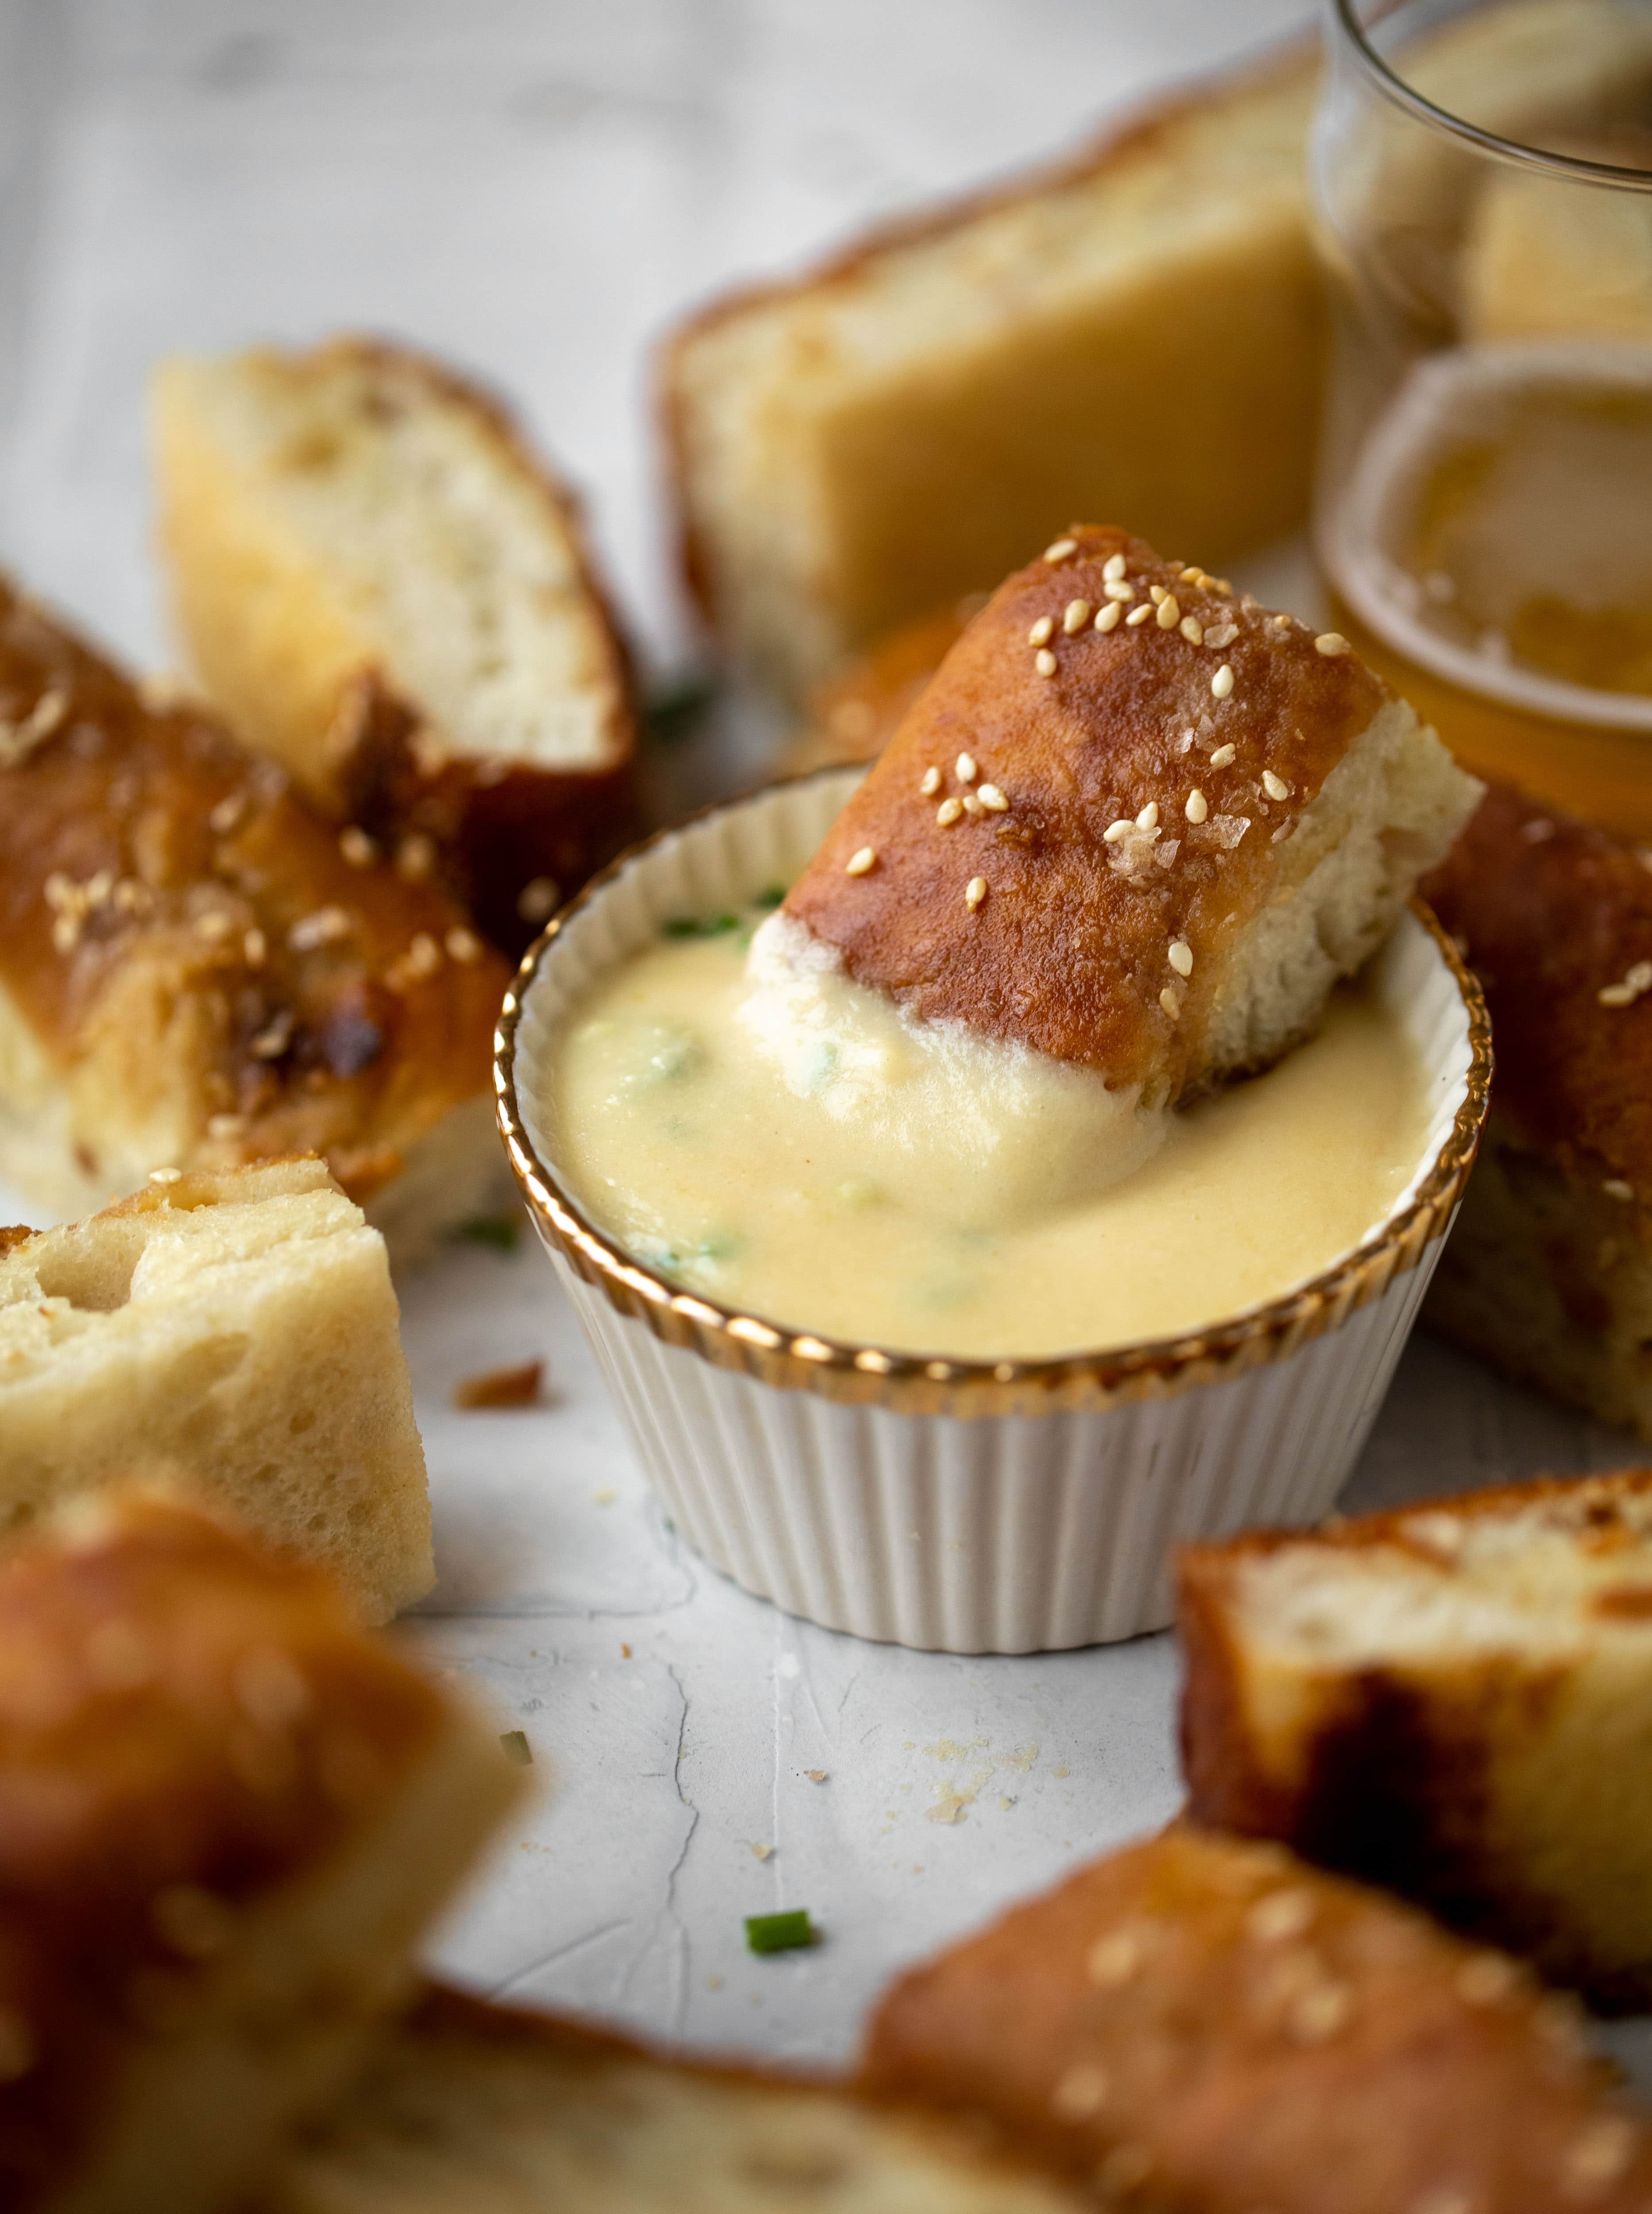 This sesame pretzel focaccia bread is amazing! Almost like a soft pretzel with crispy edges. Serve with a delicious dijon beer cheese.